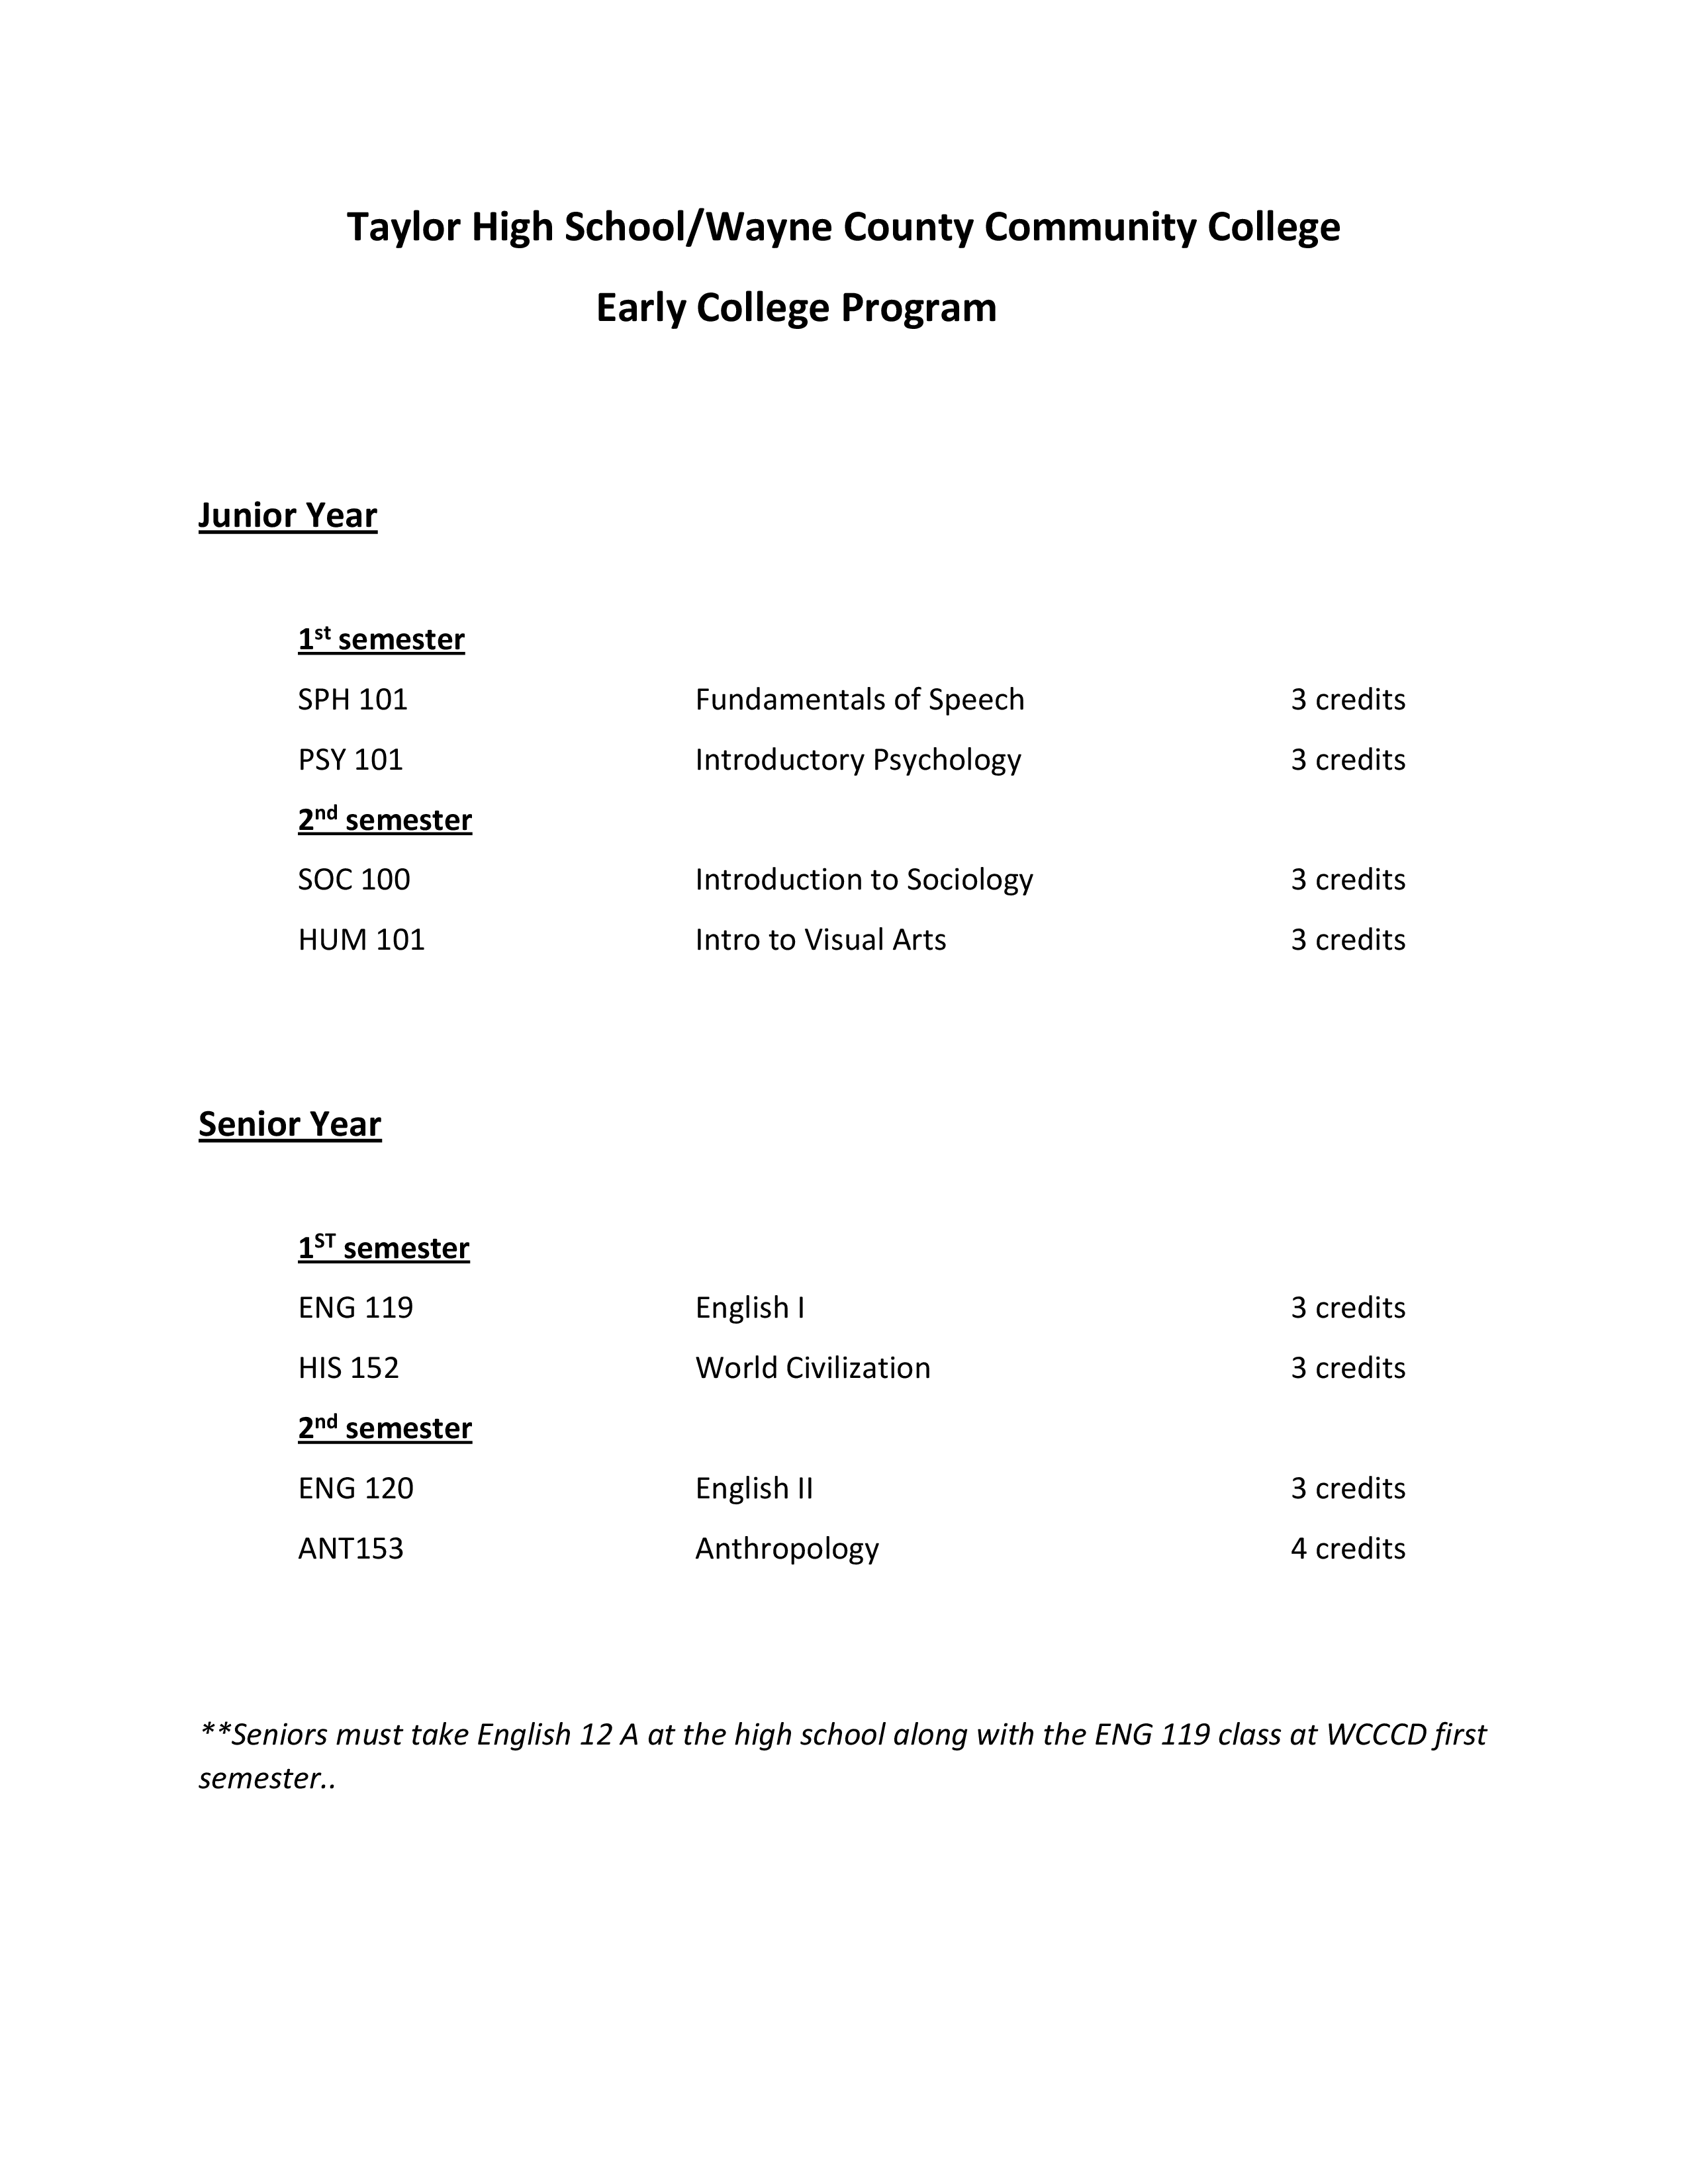 WCCCD Early College Classes